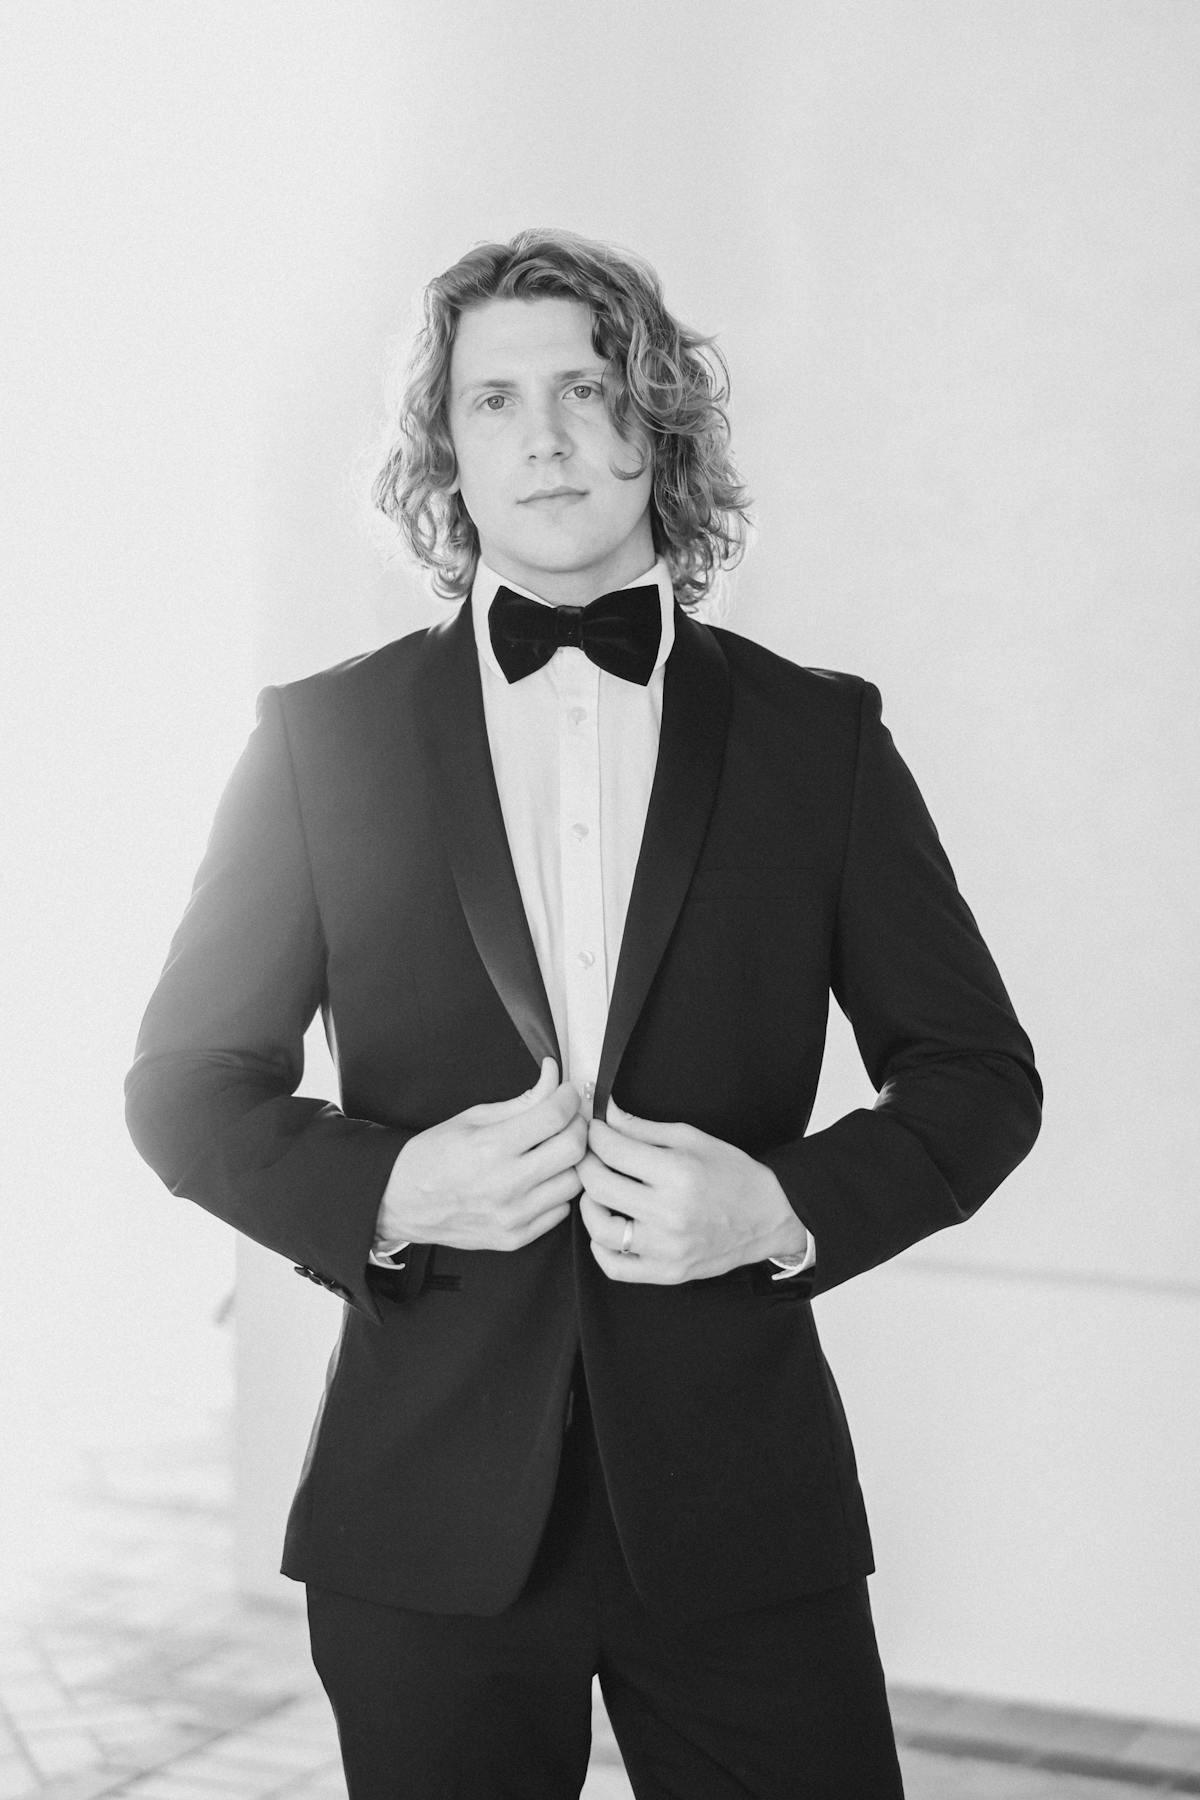 Men's tuxedo and bow tie for black-tie event in black and white